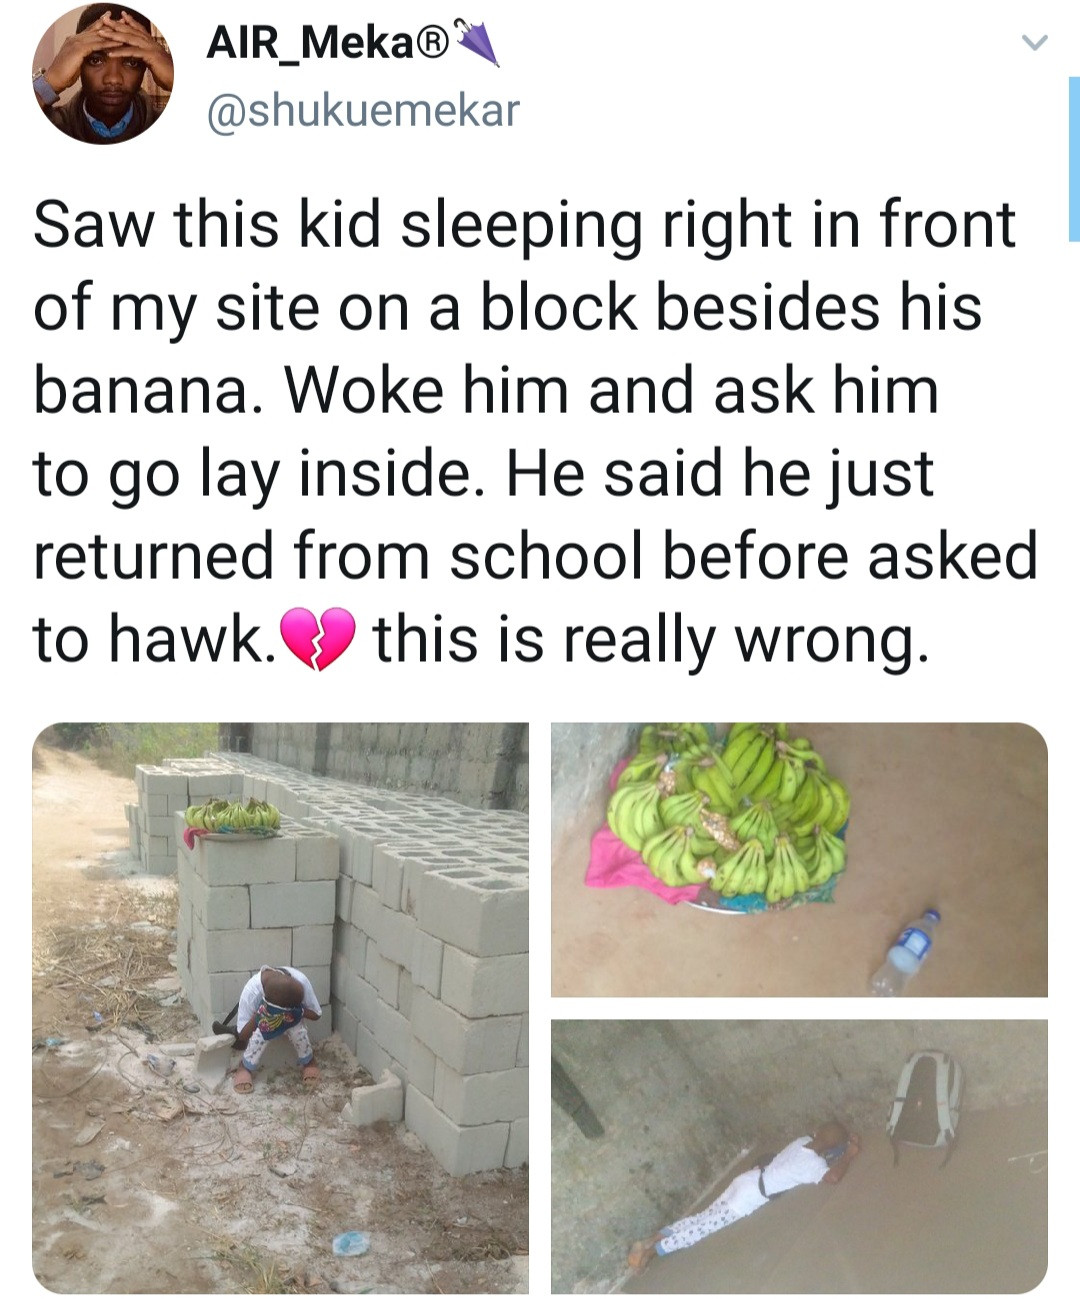 Child found sleeping in the streets after being made to hawk bananas upon his return from school